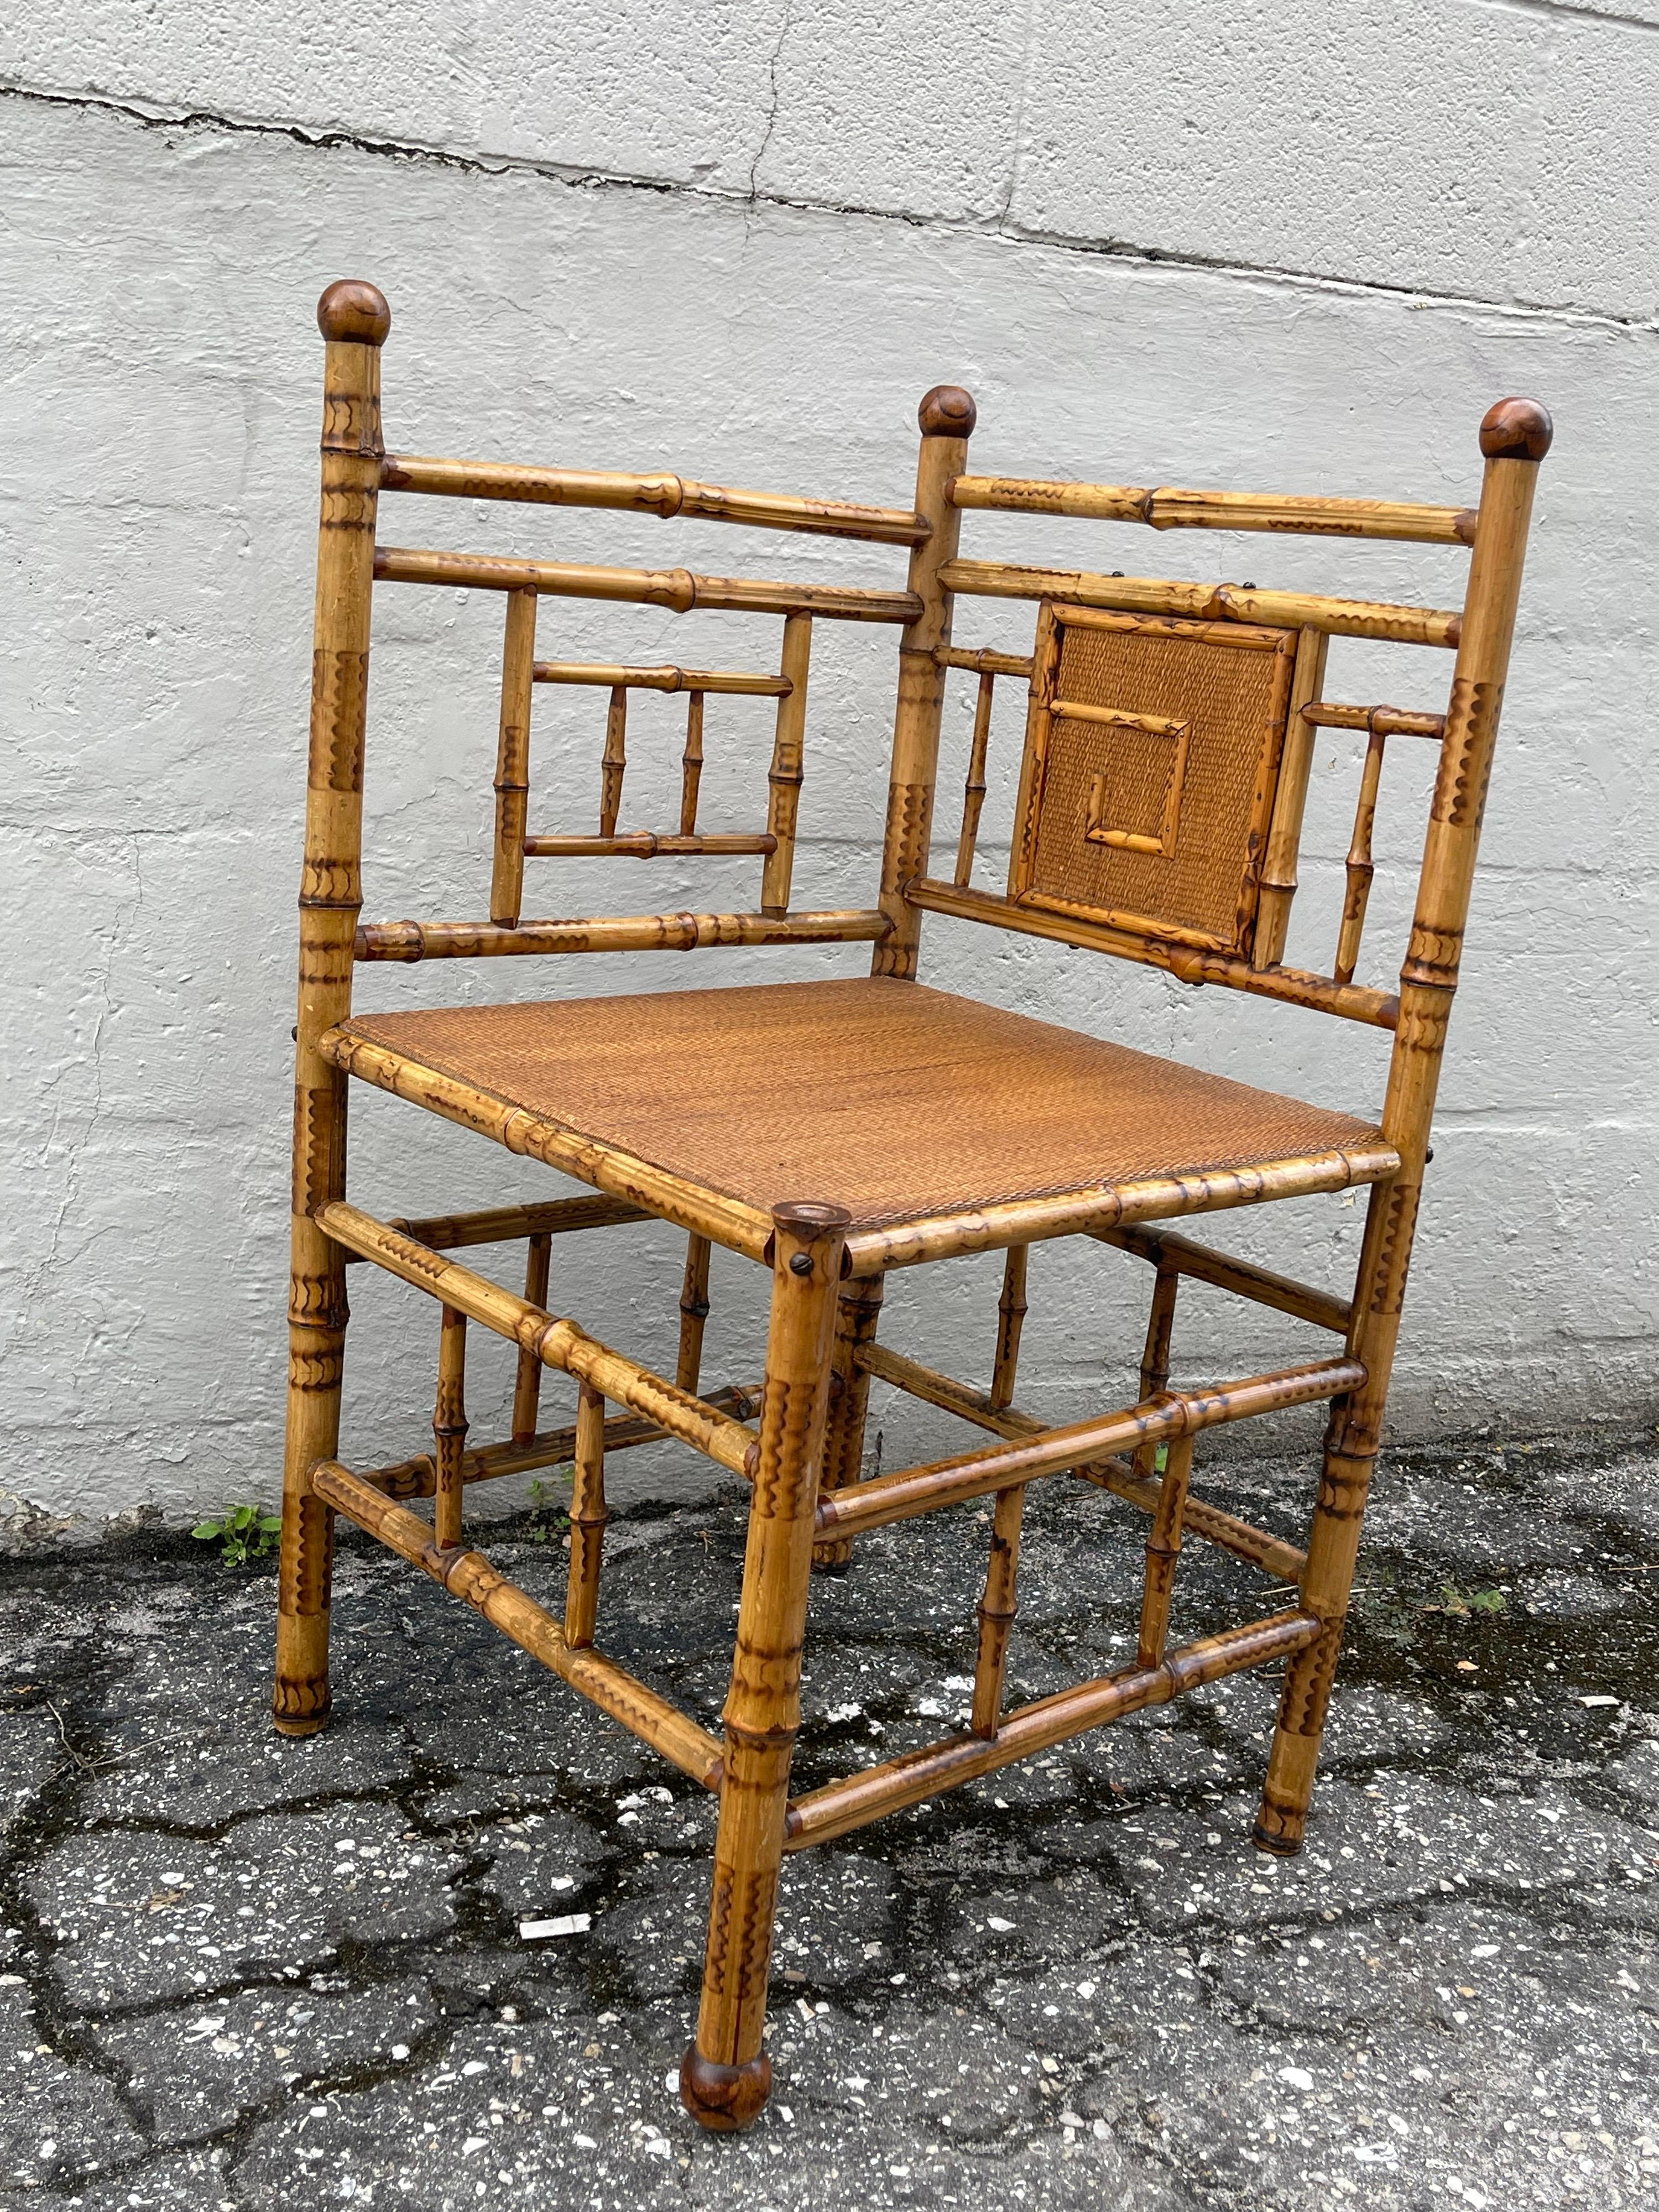 Antique English corner bamboo chair in very good original condition. Great accent piece for any room.